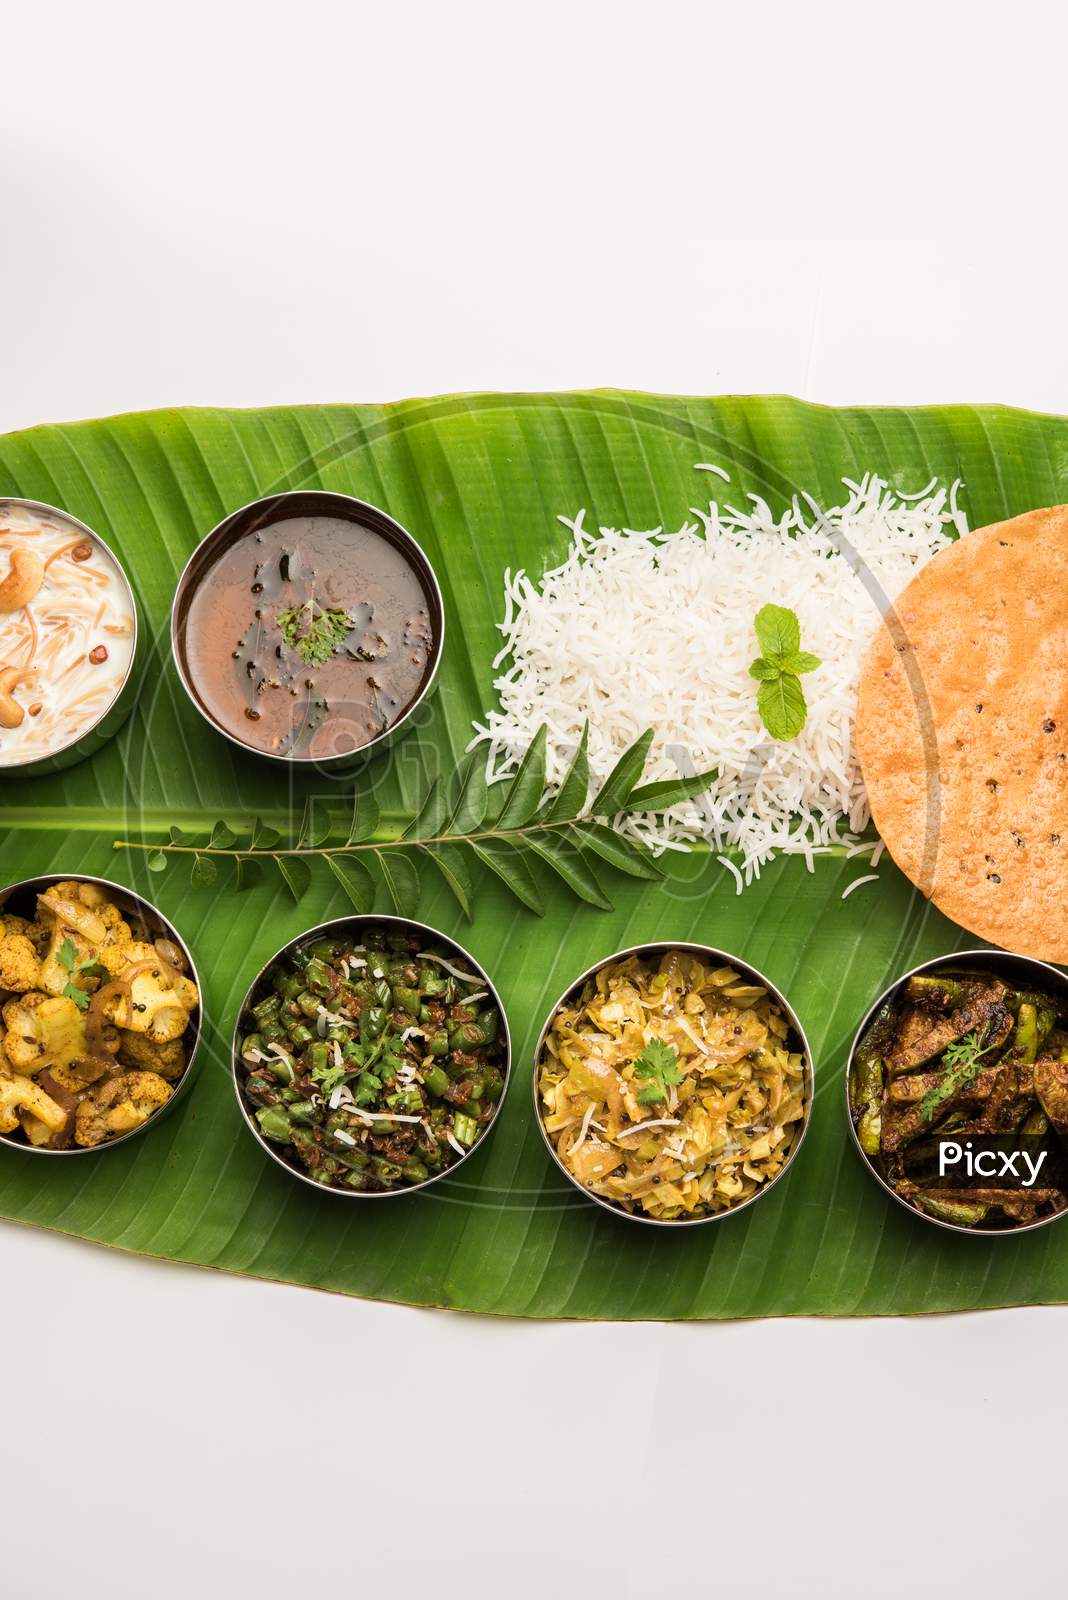 South Indian Style Lunch Or Dinner Meal Or Food Served With A Selection Of Recipes Over Banana Leaf